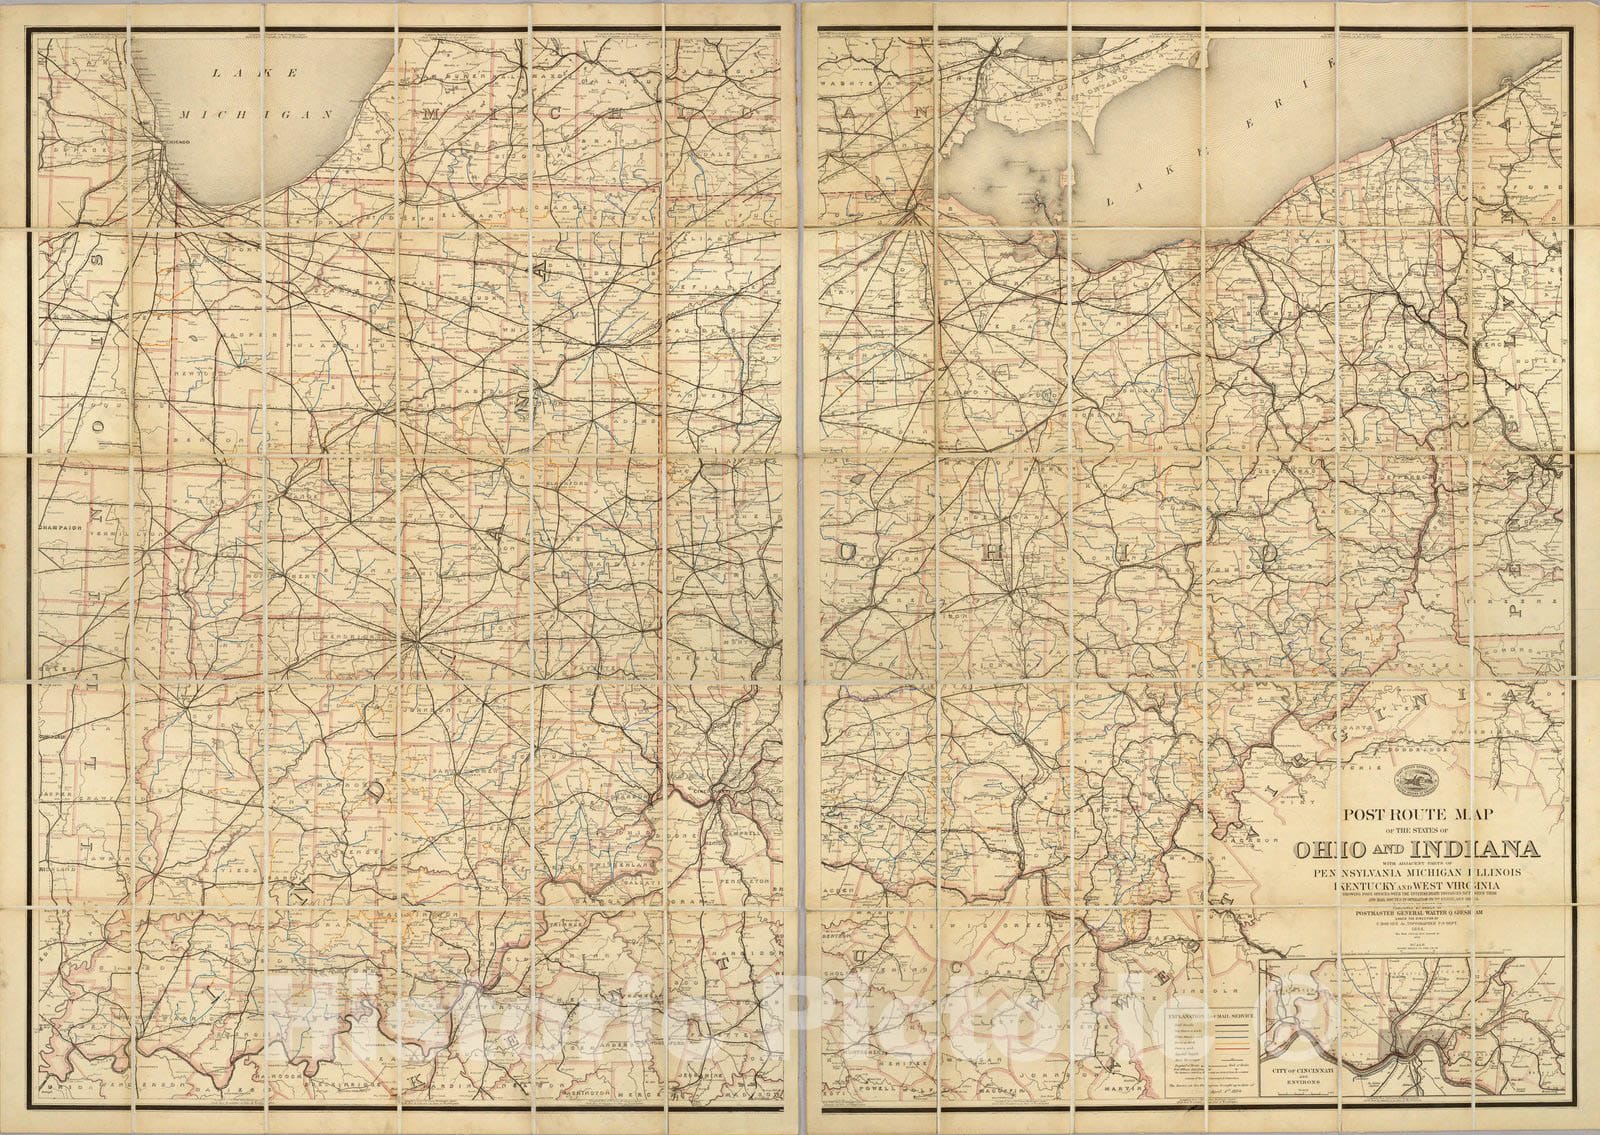 Historic Map : Post route map of the states of Ohio and Indiana with Cinncinnati and environs, 1884 - Vintage Wall Art